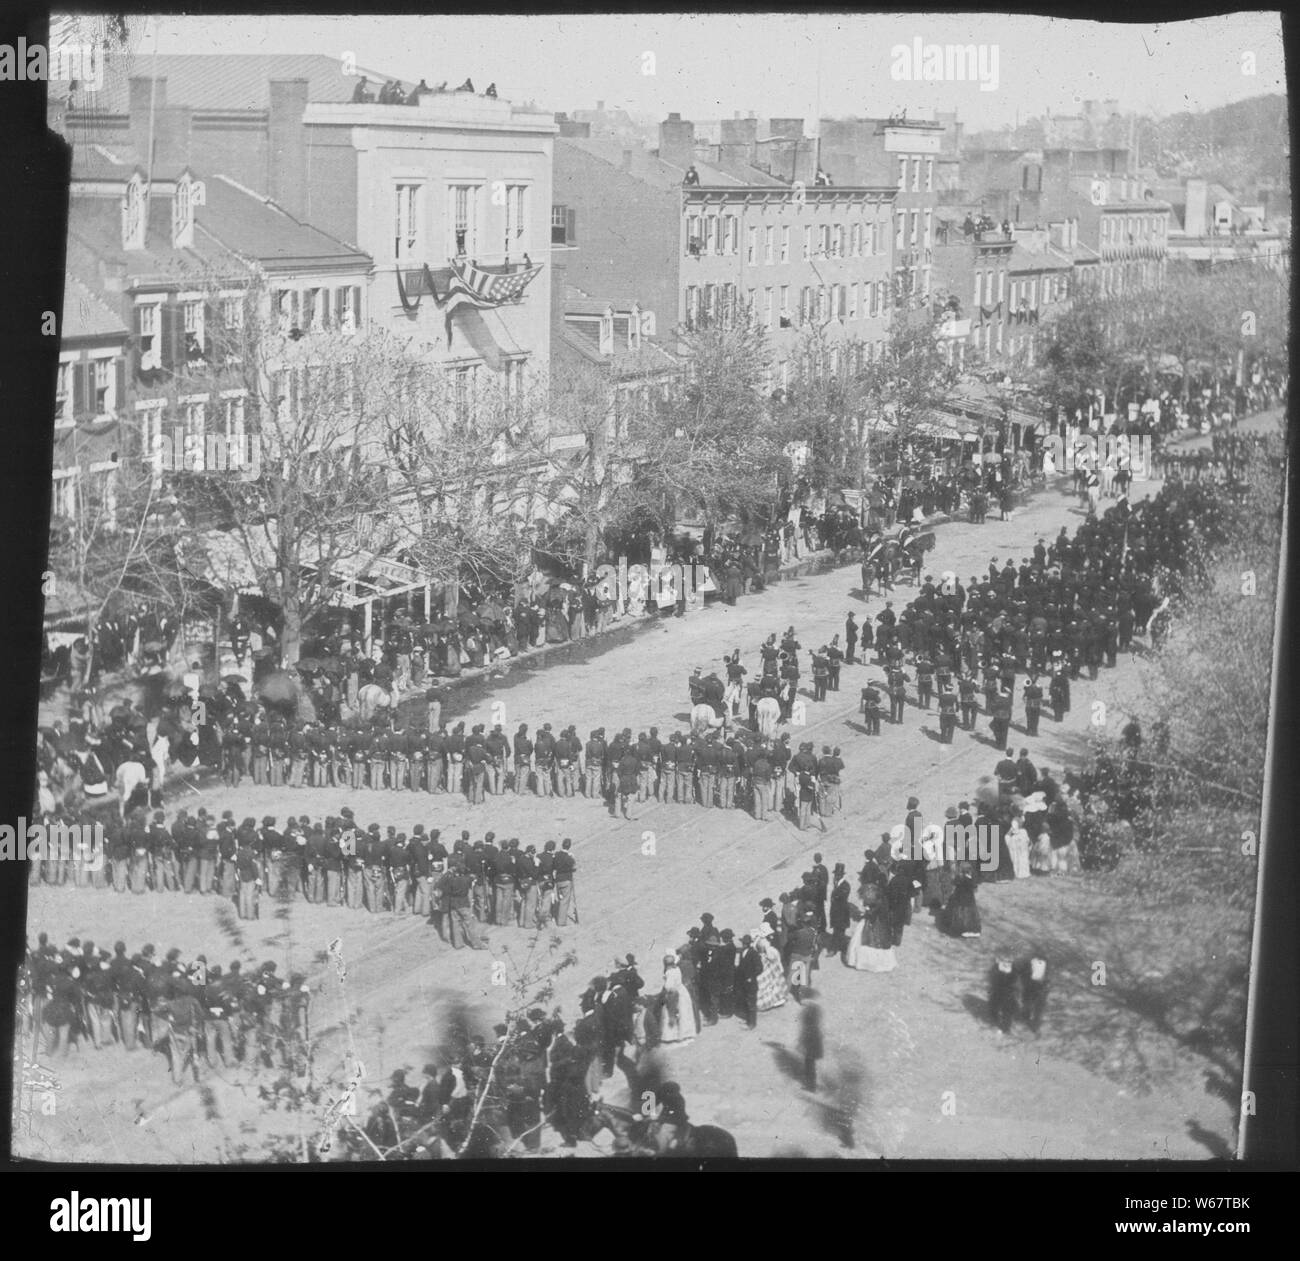 New 5x7 Photo Funeral Procession of President Abraham Lincoln in Washington 